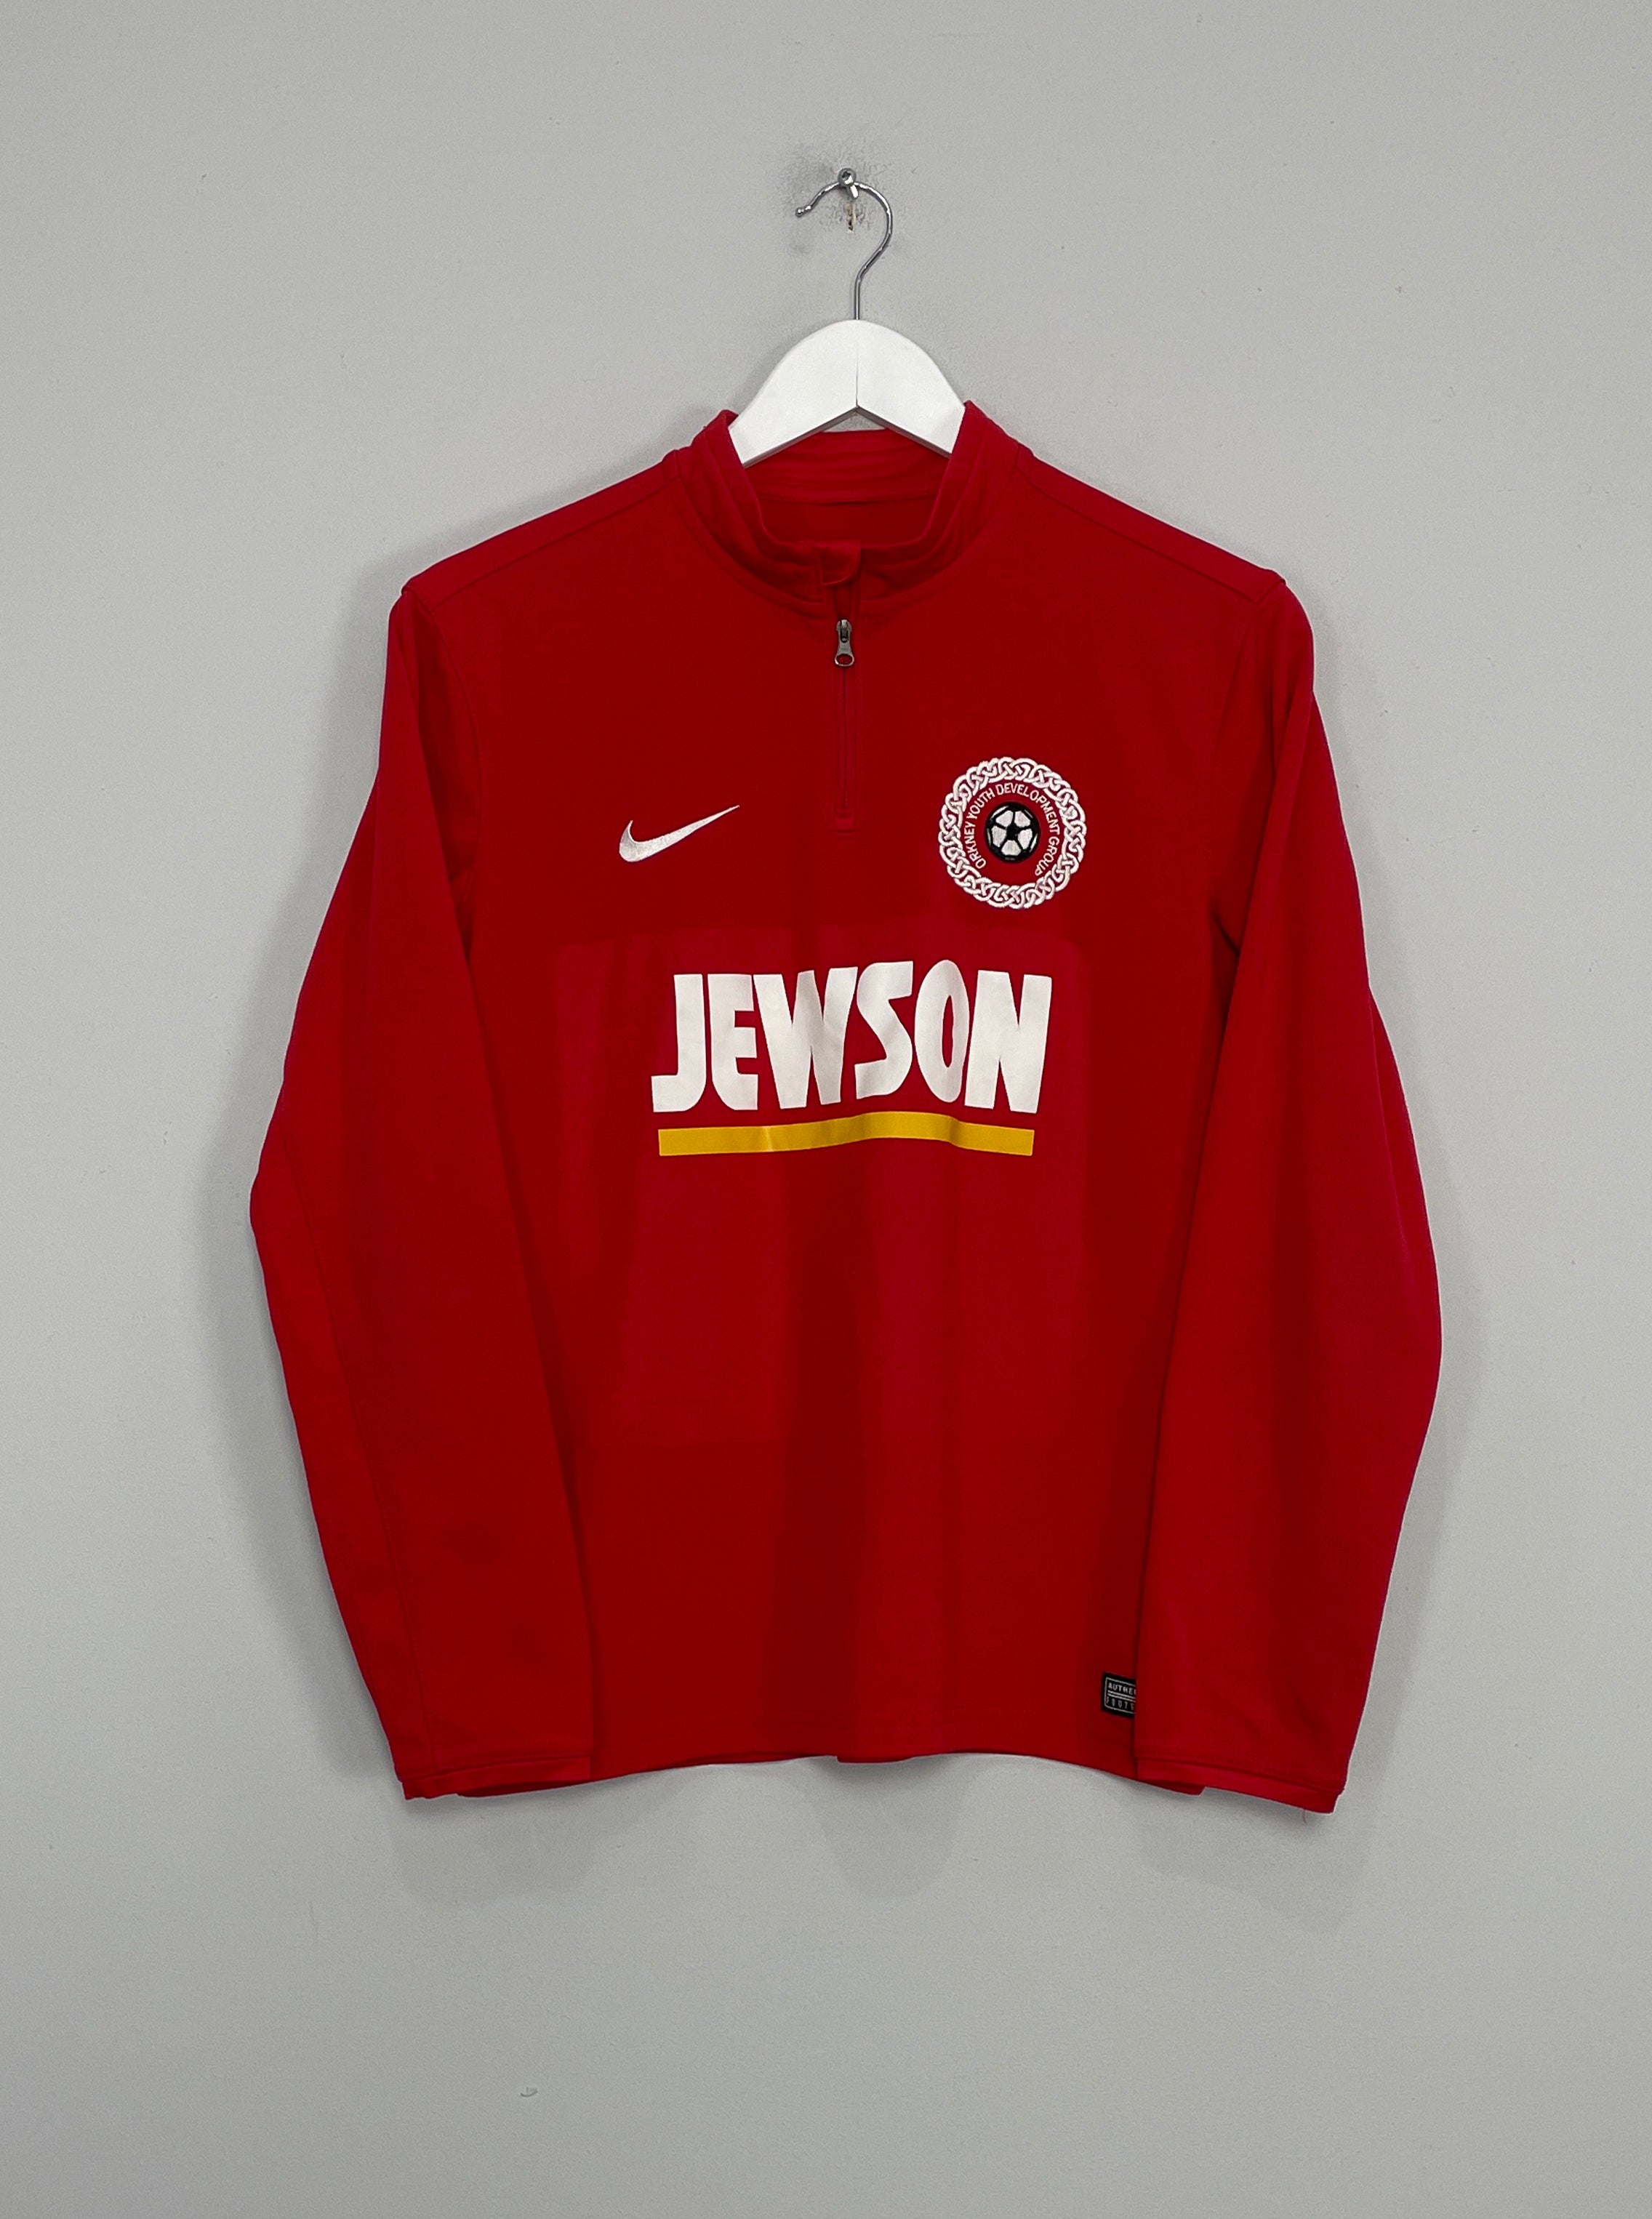 2017/18 ORKNEY YOUTH ACADEMY 1/4 ZIP TRAINING TOP (S) NIKE